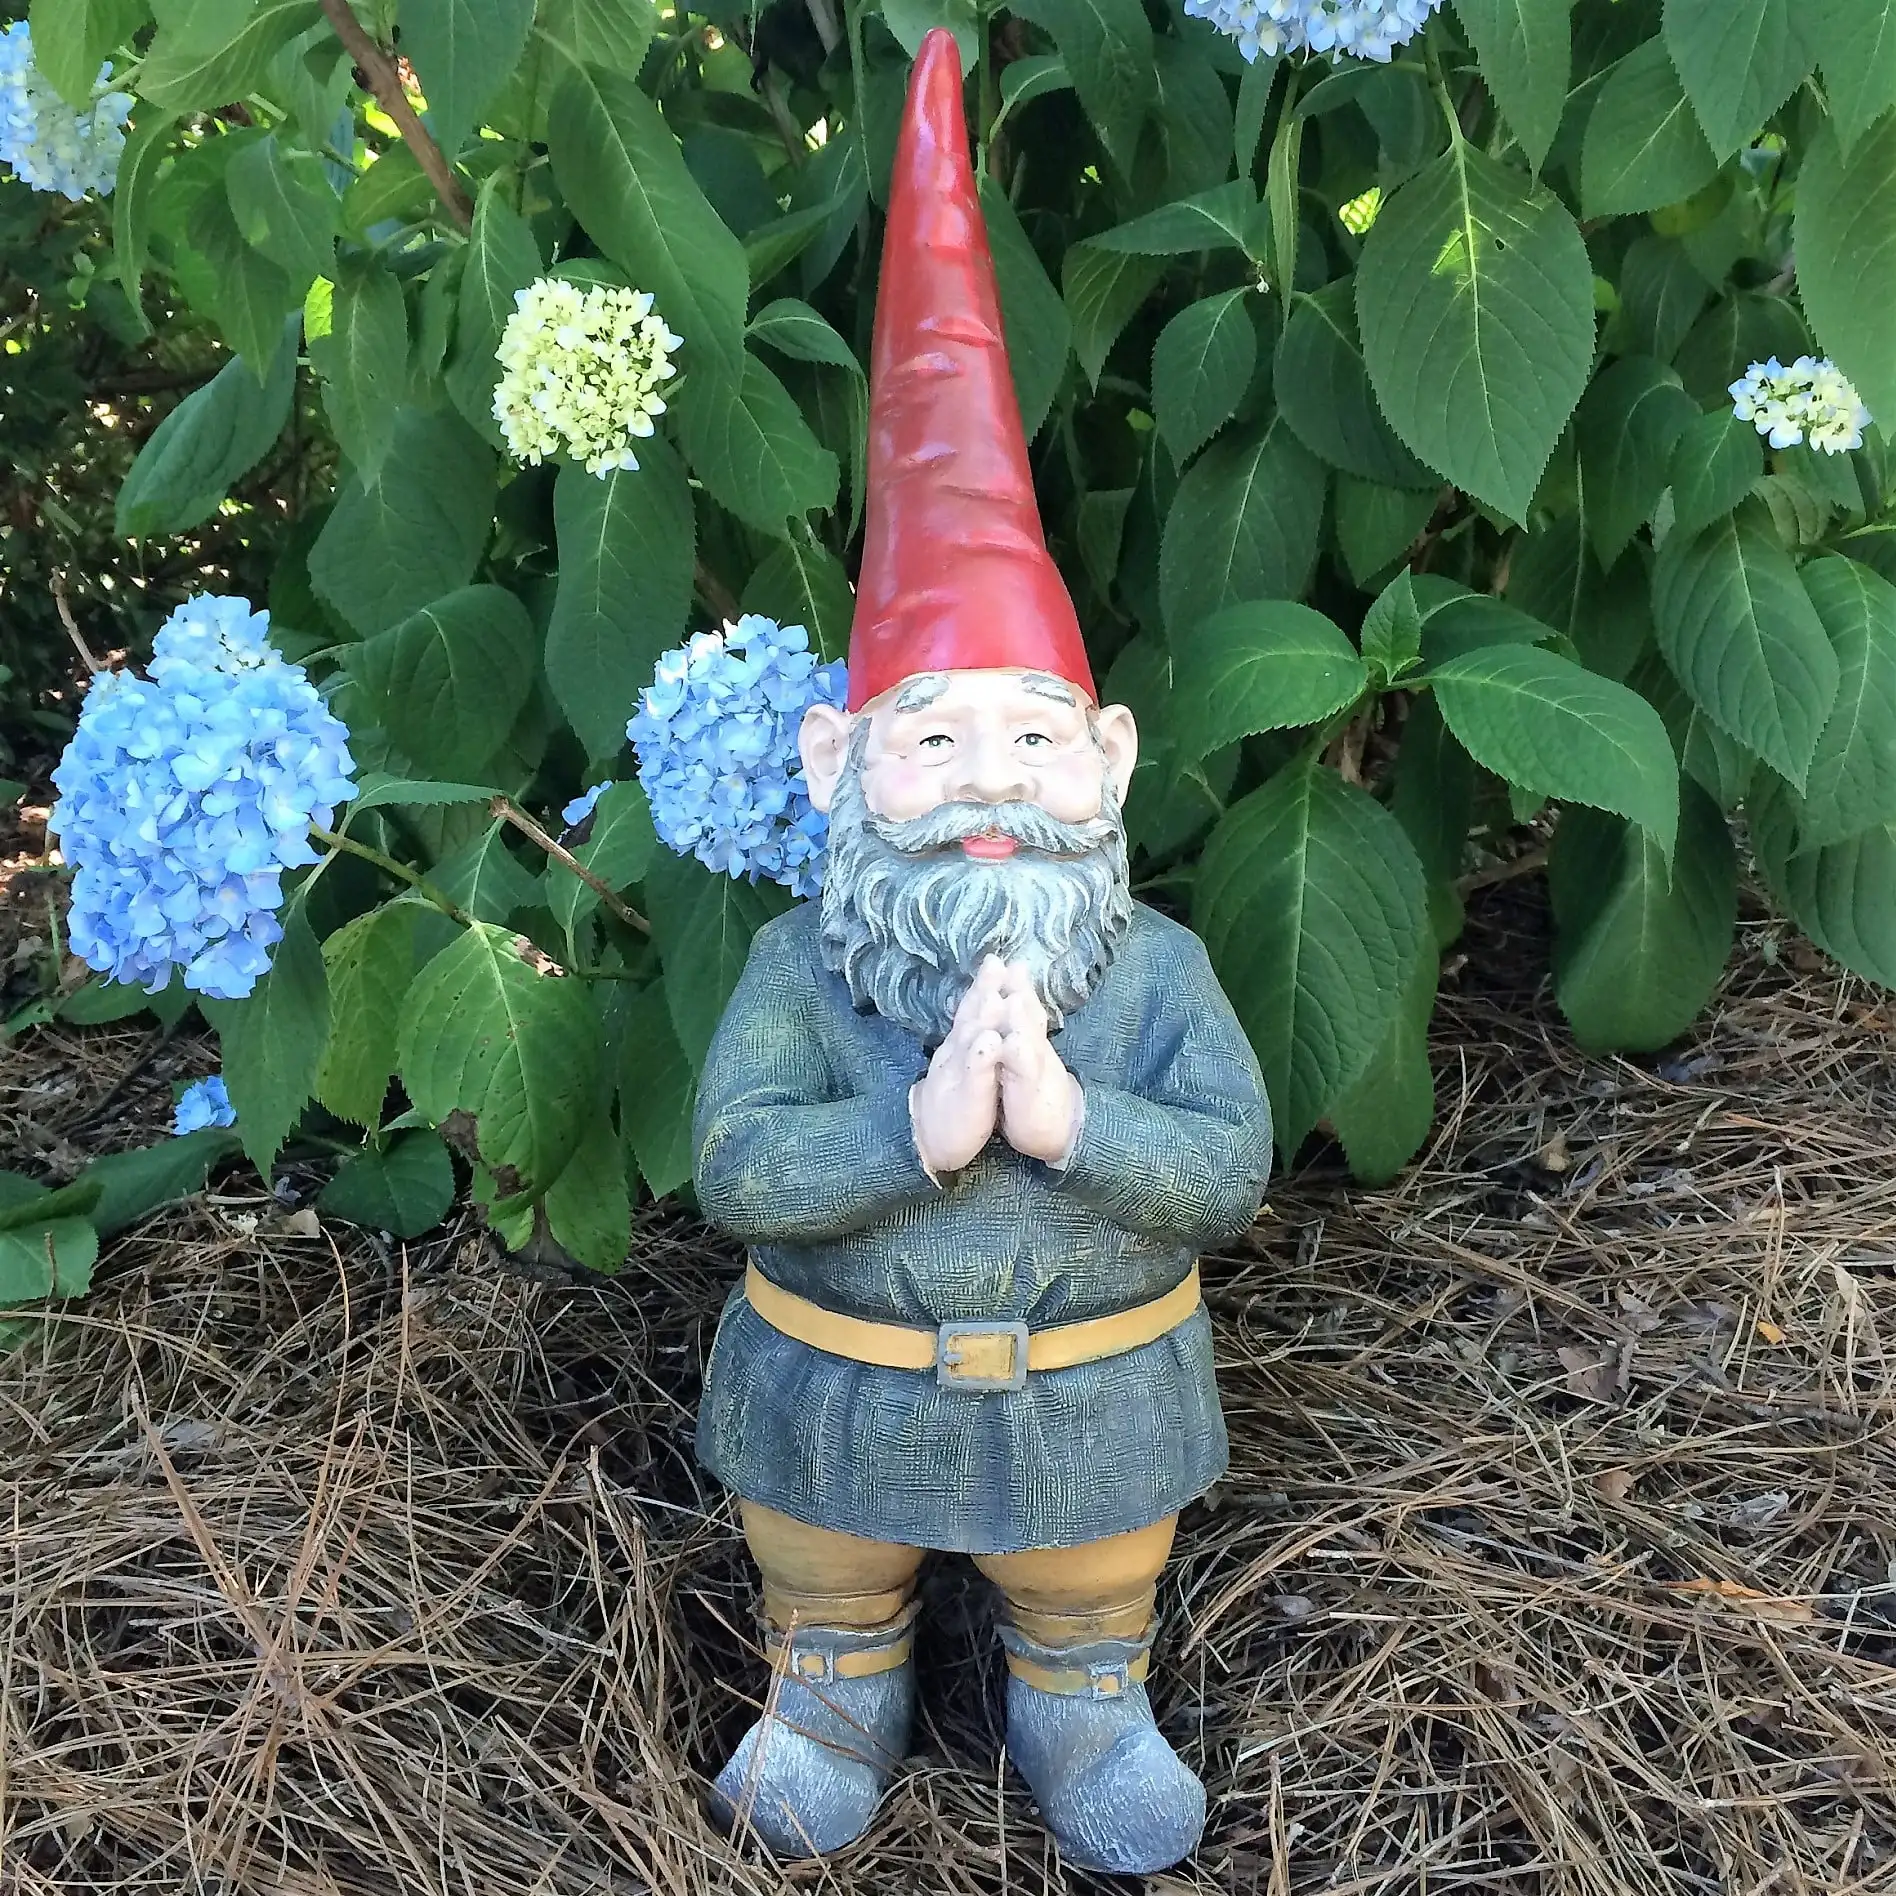 

20" Gnome Garden Statue Decorations Outdoor Figurine Sculpture for Patio, Balcony, Yard Ornament Housewarming Gift